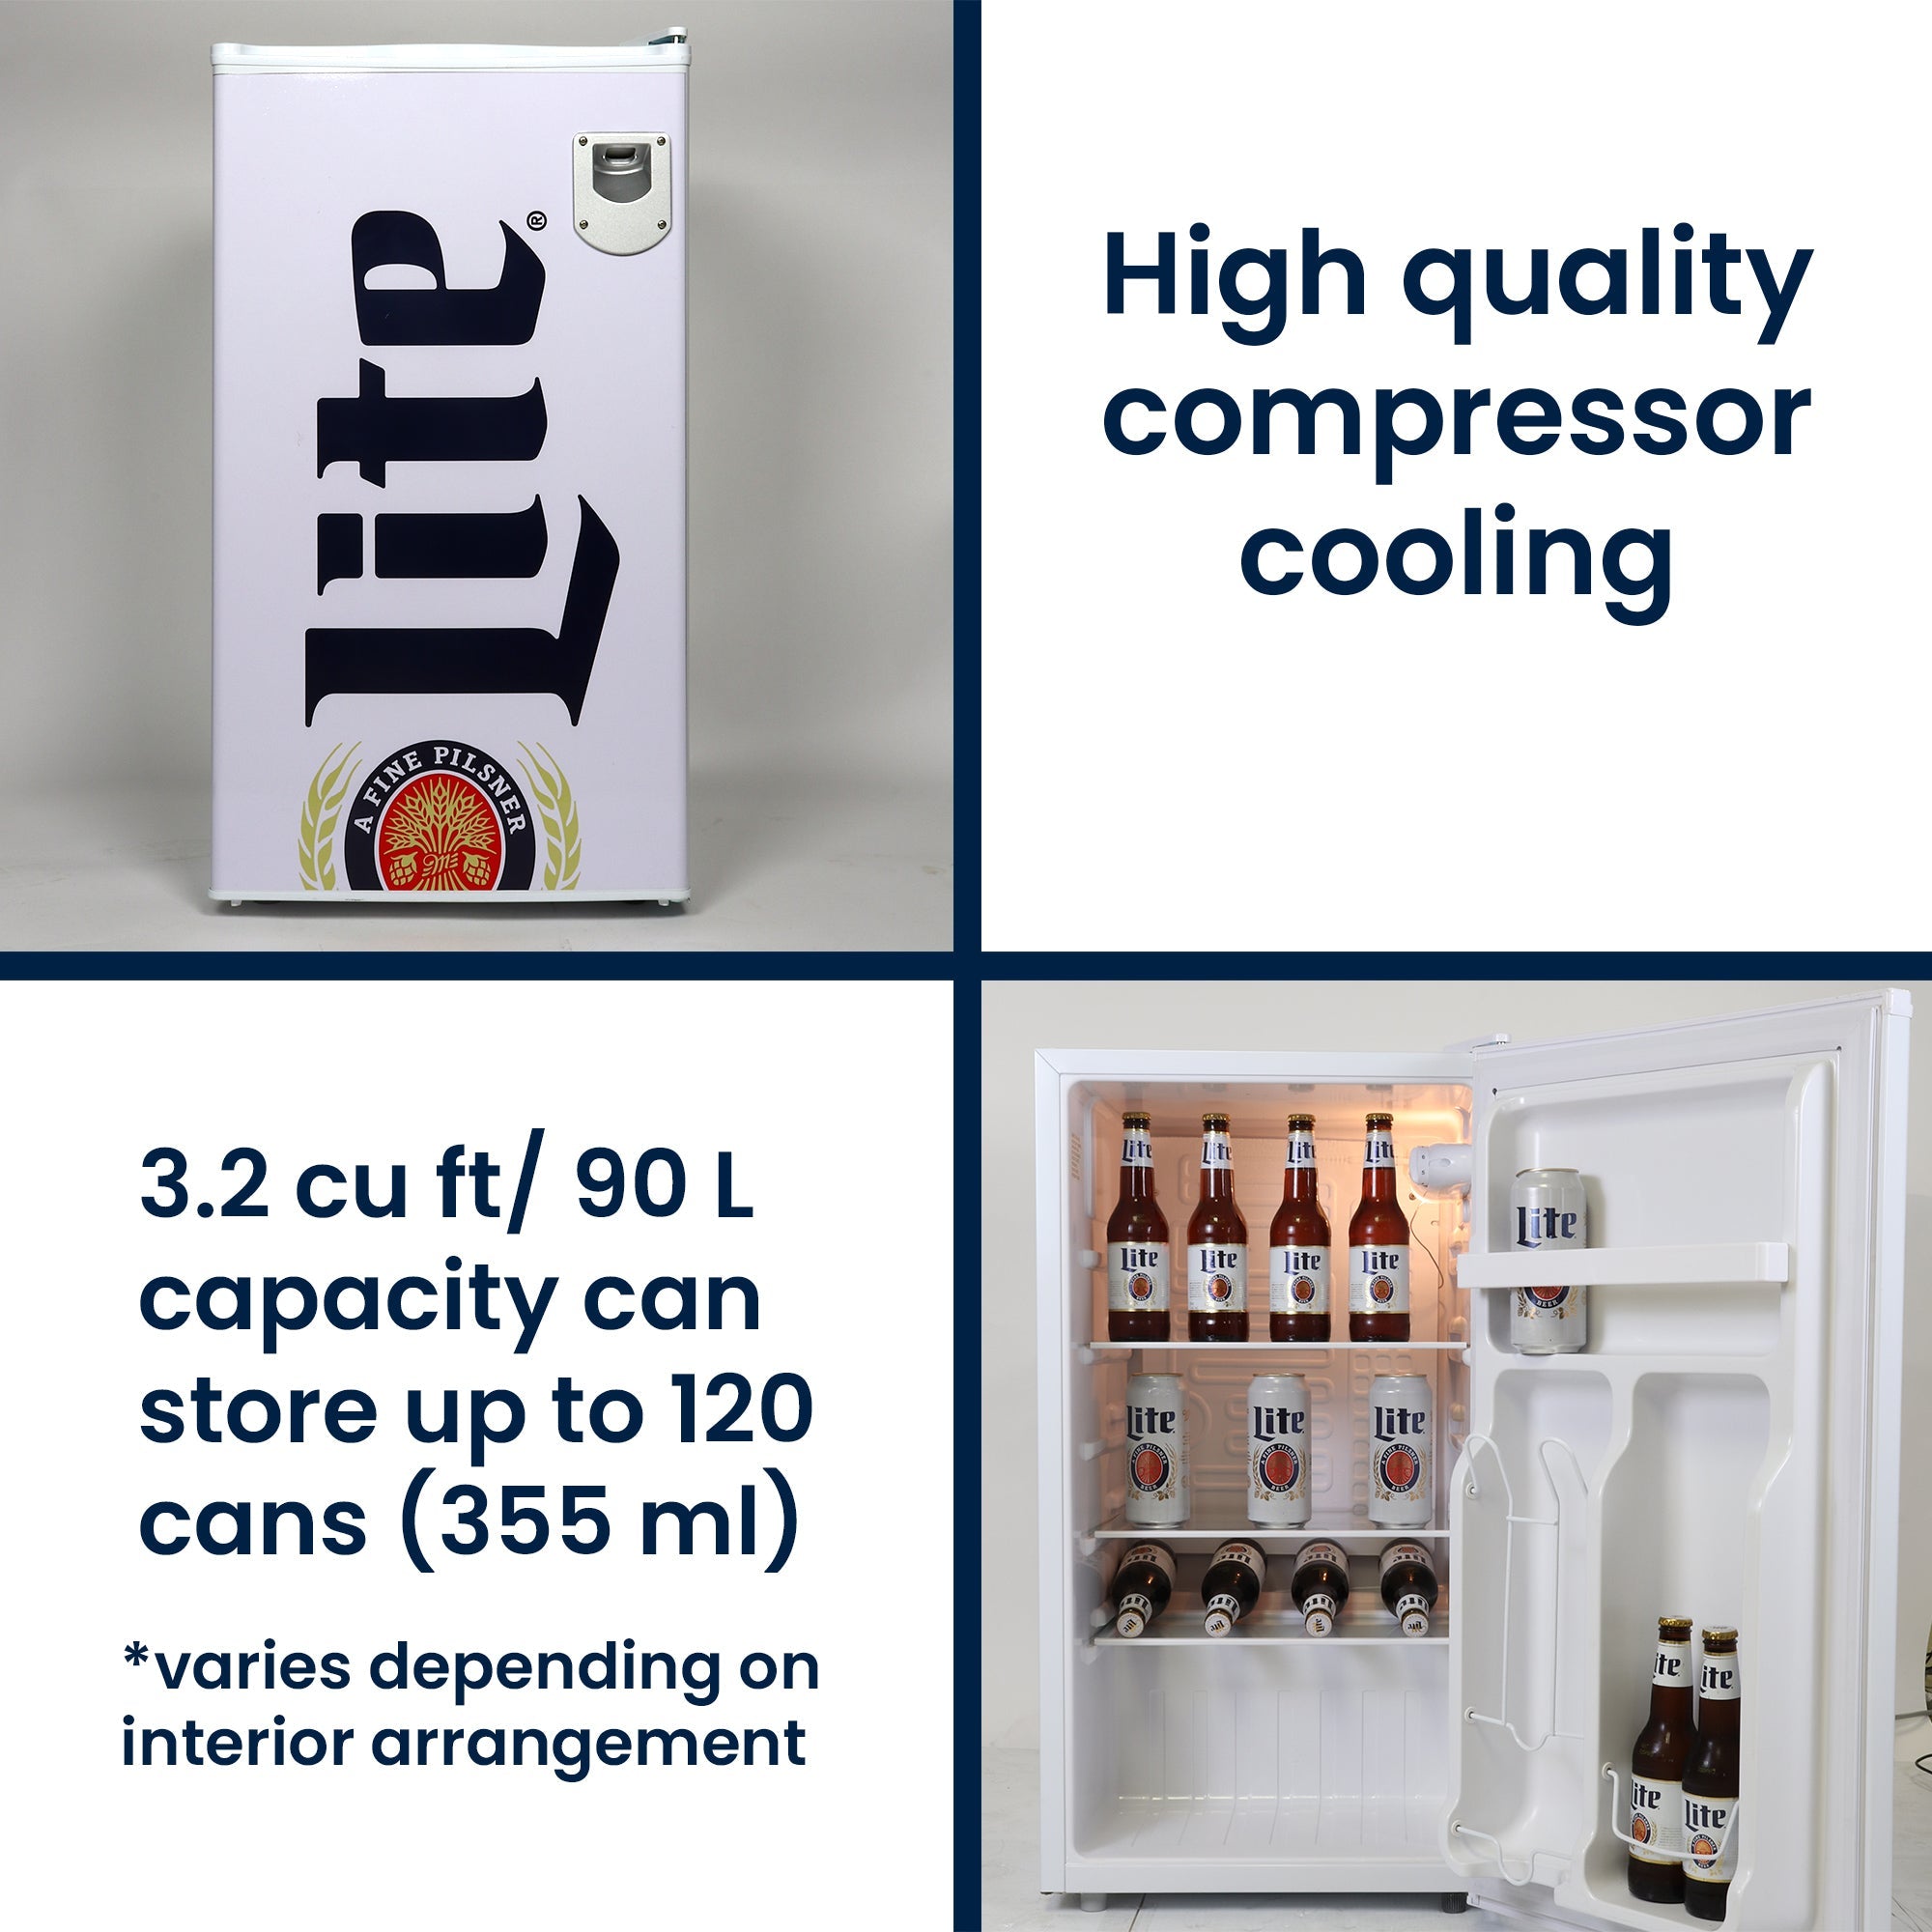 The top half of the image shows the closed fridge with text to the right reading, "High quality compressor cooling." Bottom half shows the compact fridge with door installed to open to the right and cans and bottles of Miller Lite inside. Text to the left reads, "3.2 cu ft (90 L capacity can store up to 120 cans (355 mL); varies depending on interior arrangement"